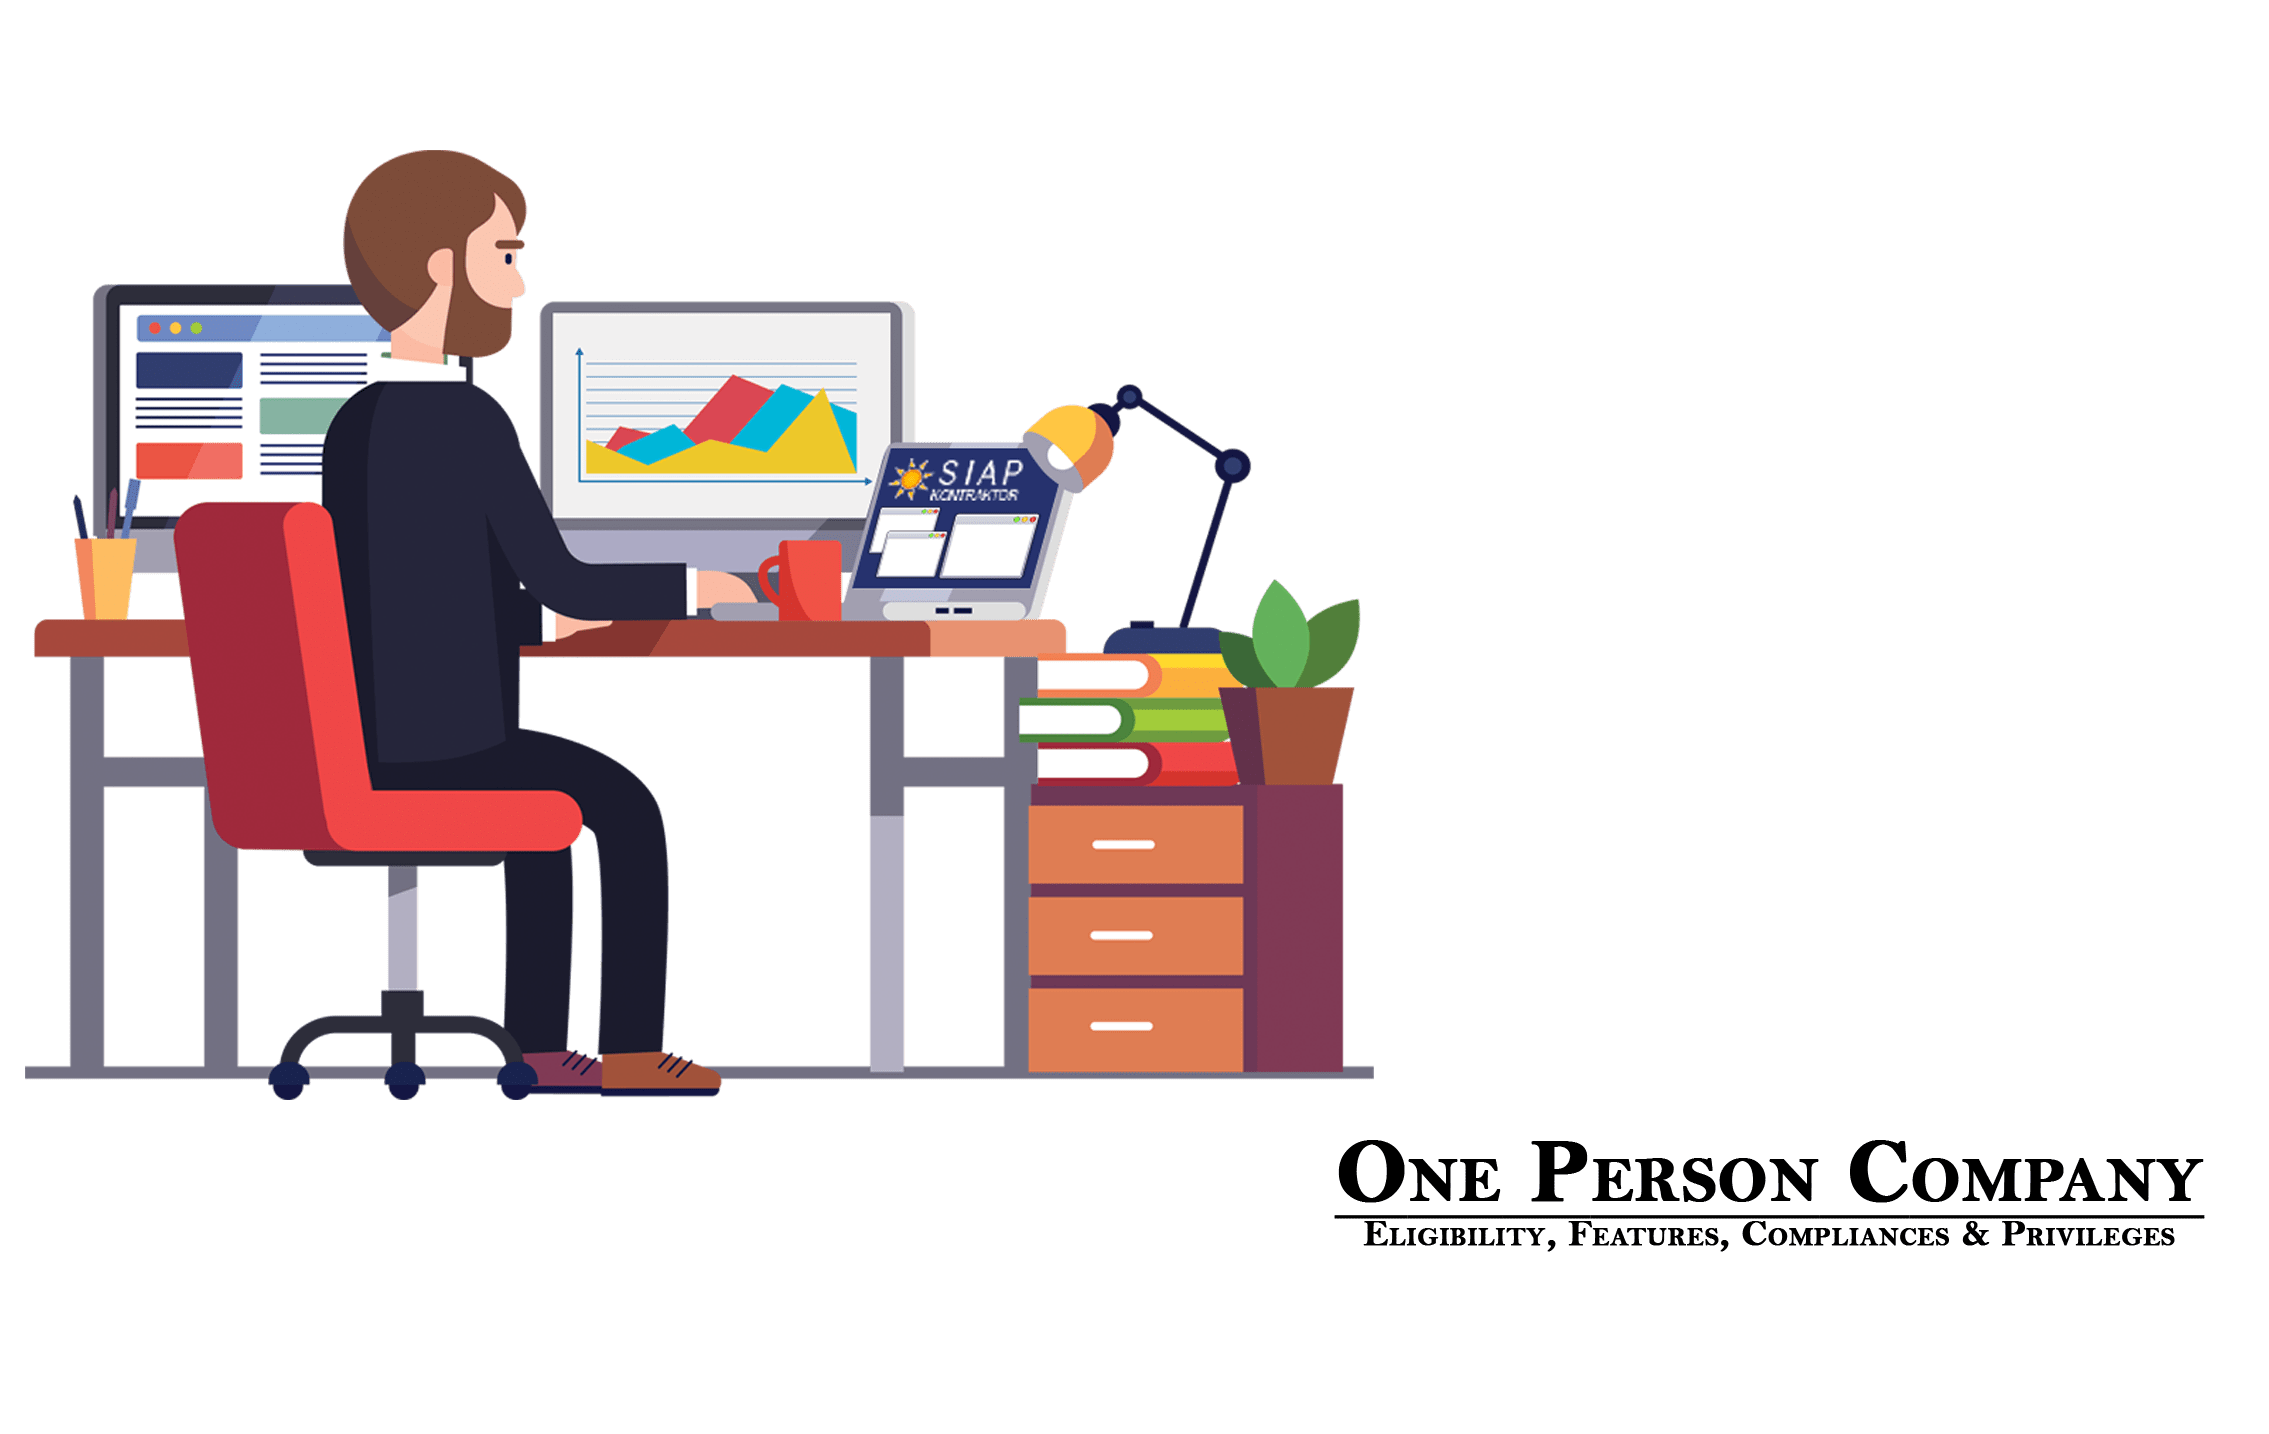 One Person Company Registration | OPC Registration | Documents